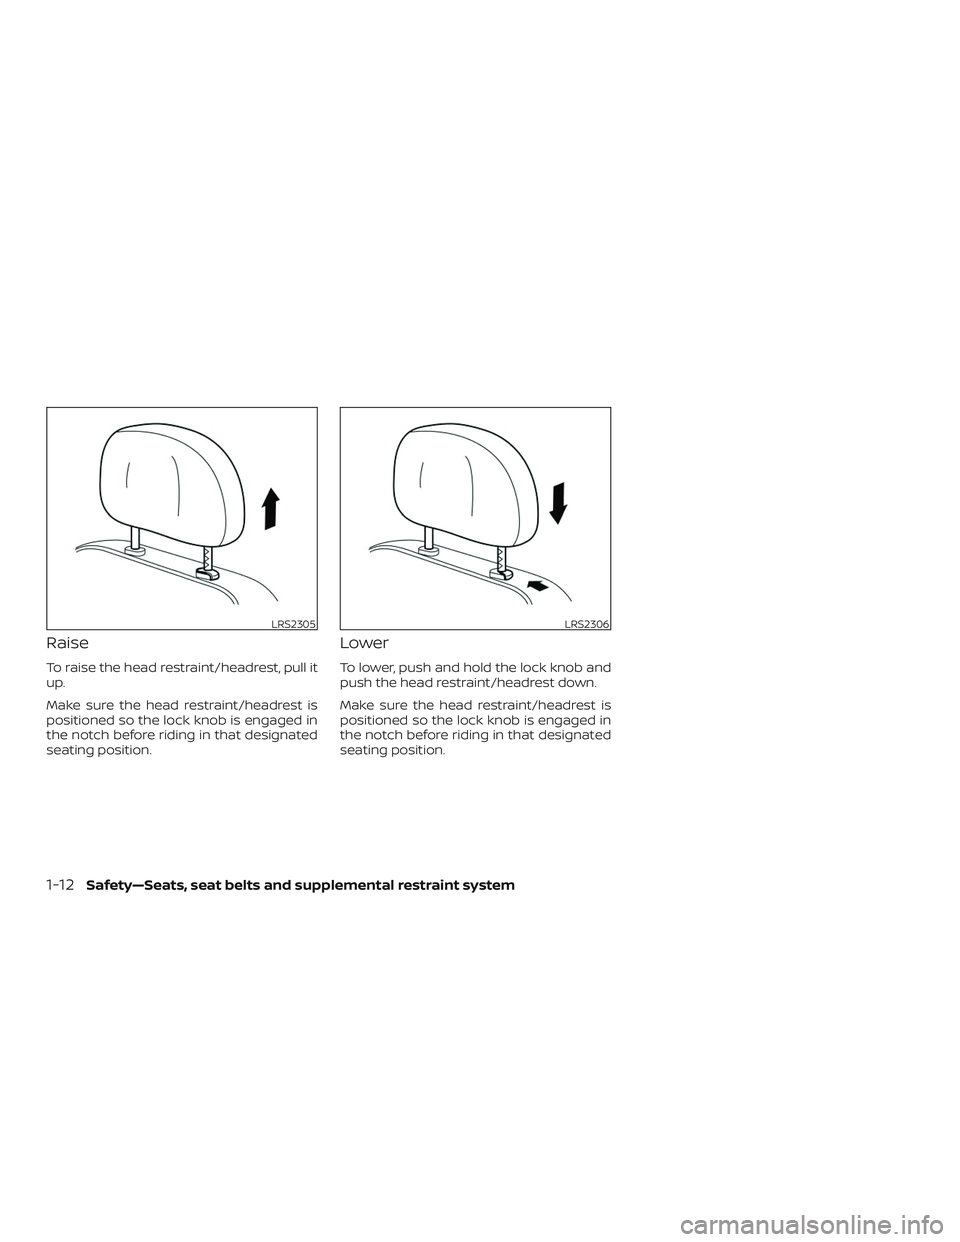 NISSAN MURANO 2019  Owner´s Manual Raise
To raise the head restraint/headrest, pull it
up.
Make sure the head restraint/headrest is
positioned so the lock knob is engaged in
the notch before riding in that designated
seating position.
